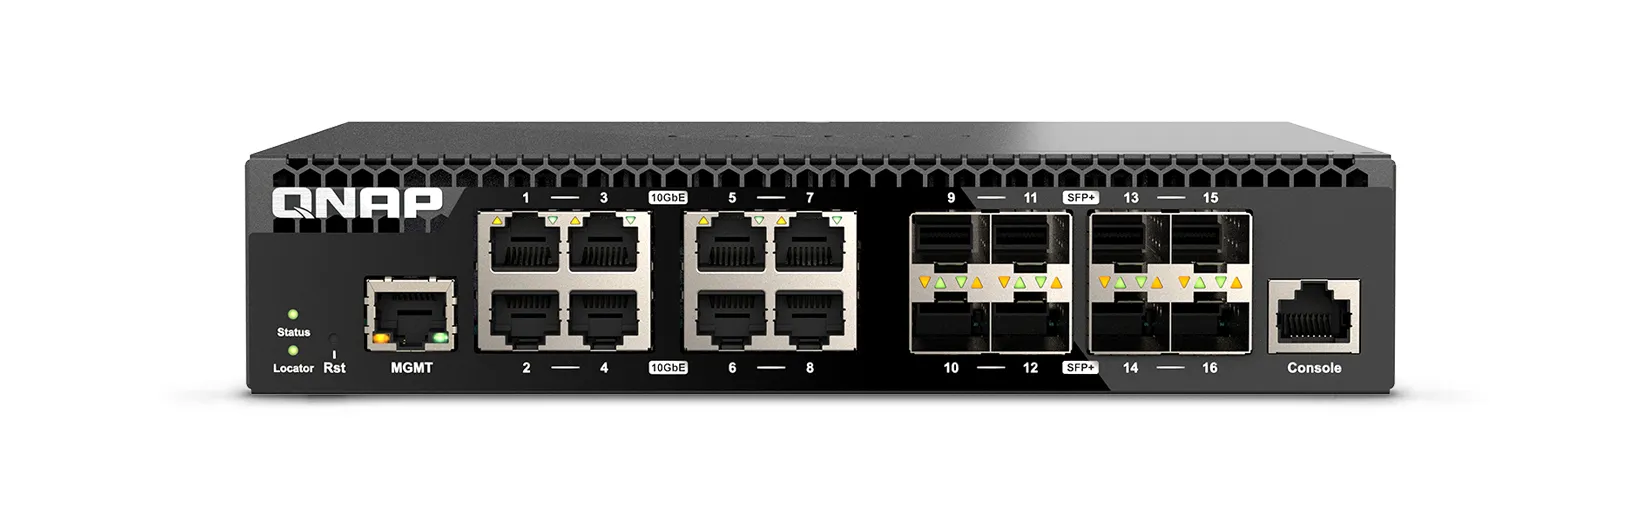 Achat Switchs et Hubs QNAP QSW-M3216R-8S8T Managed Switch 16 port of 10GbE sur hello RSE